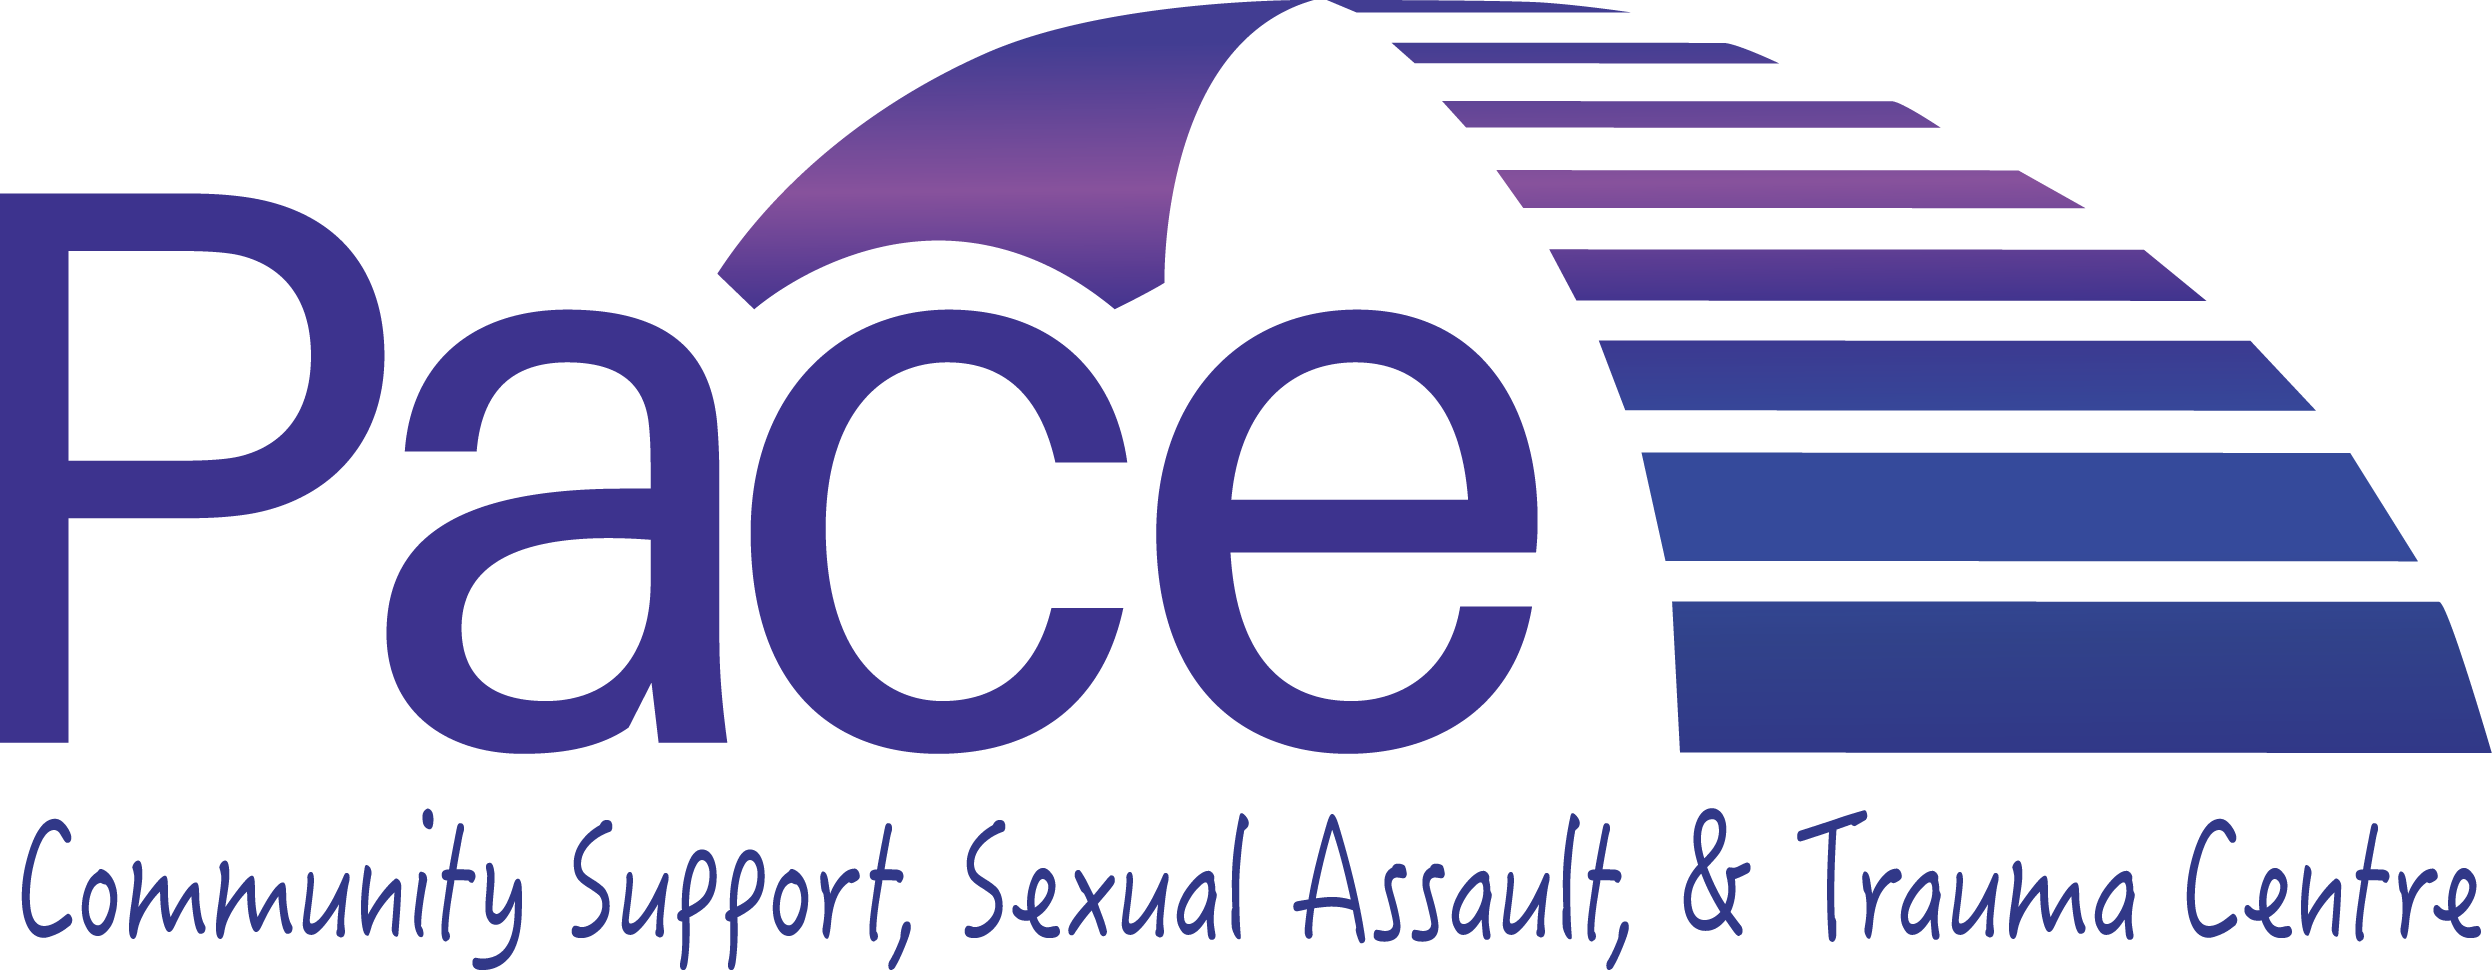 Pace Community Support, Sexual Assault, and Trauma Centre logo